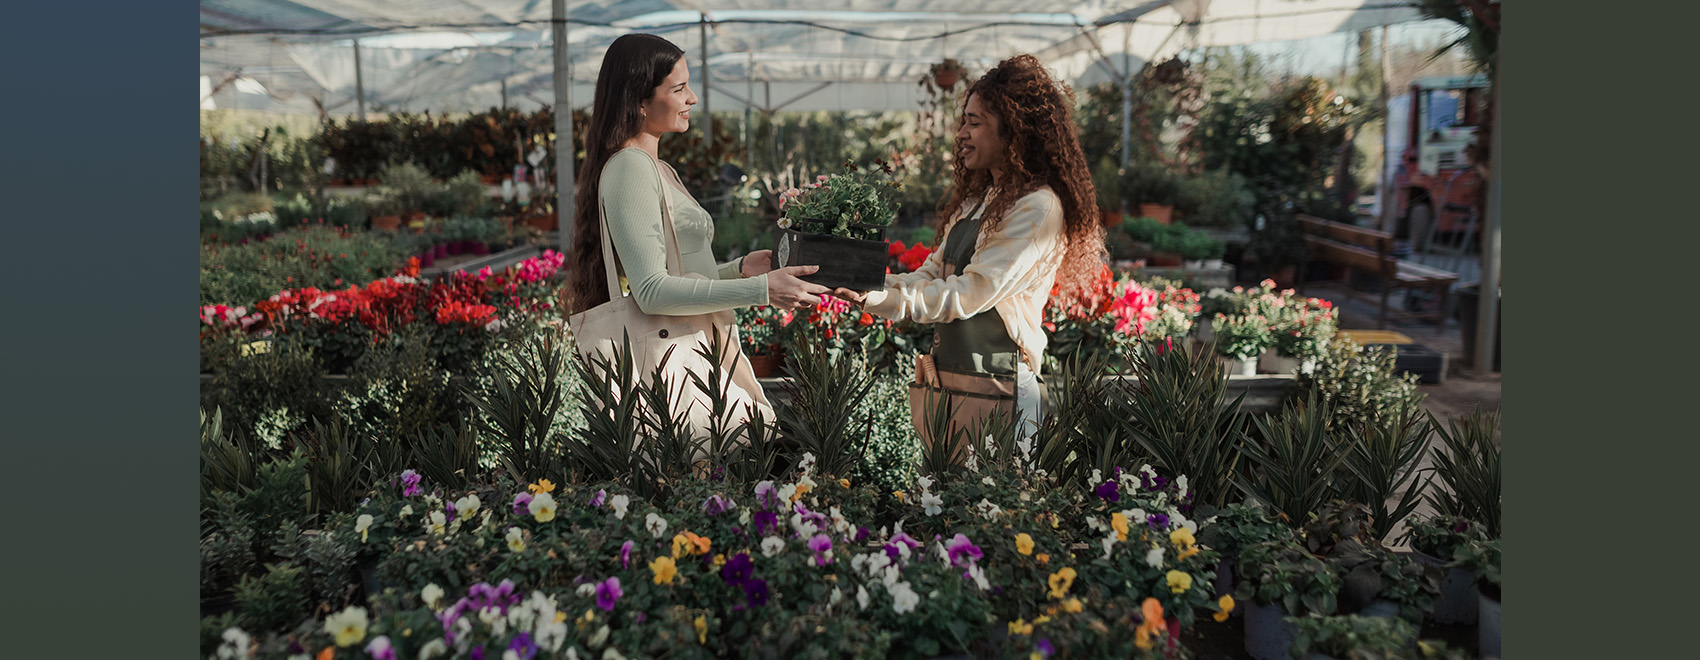 Staff attending a woman buying flowers in a greenhouse